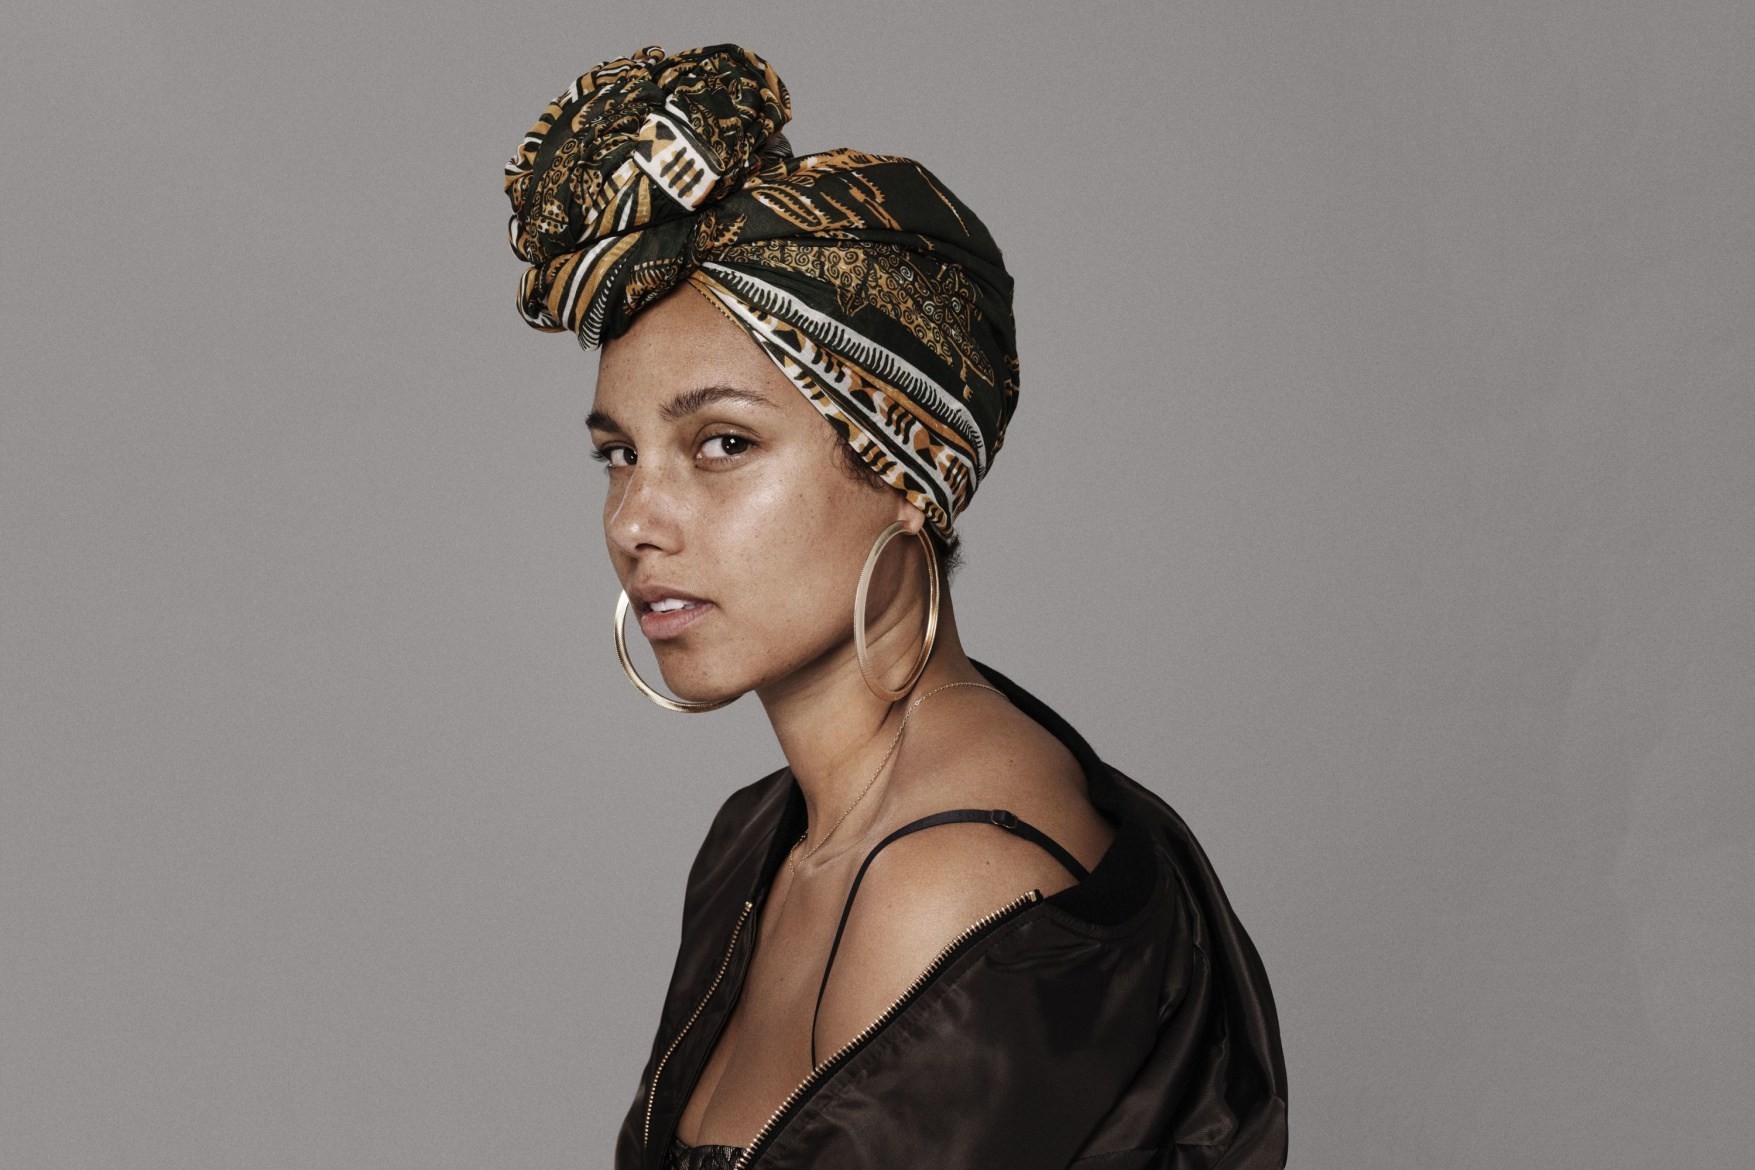 Listen to Alicia Keys & Miguel New Song “Show Me Love”